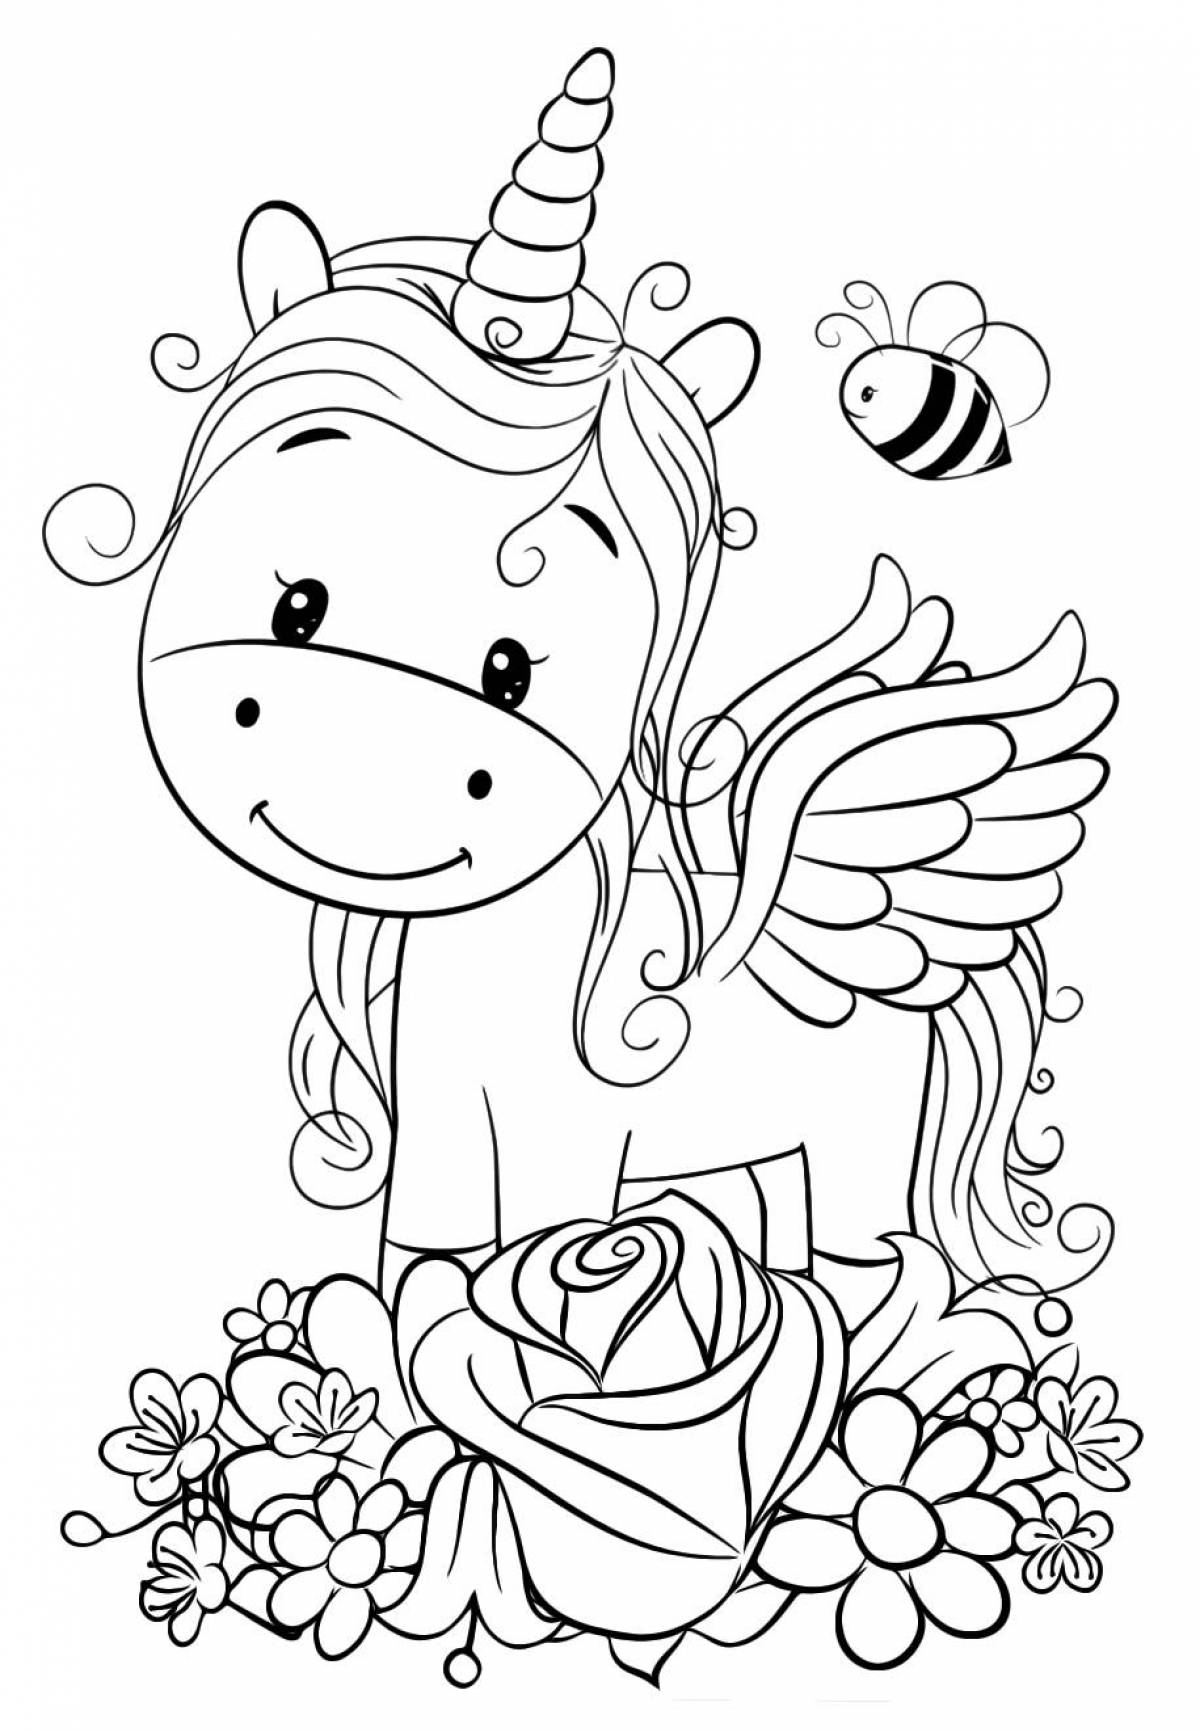 Cute unicorn coloring pages for girls